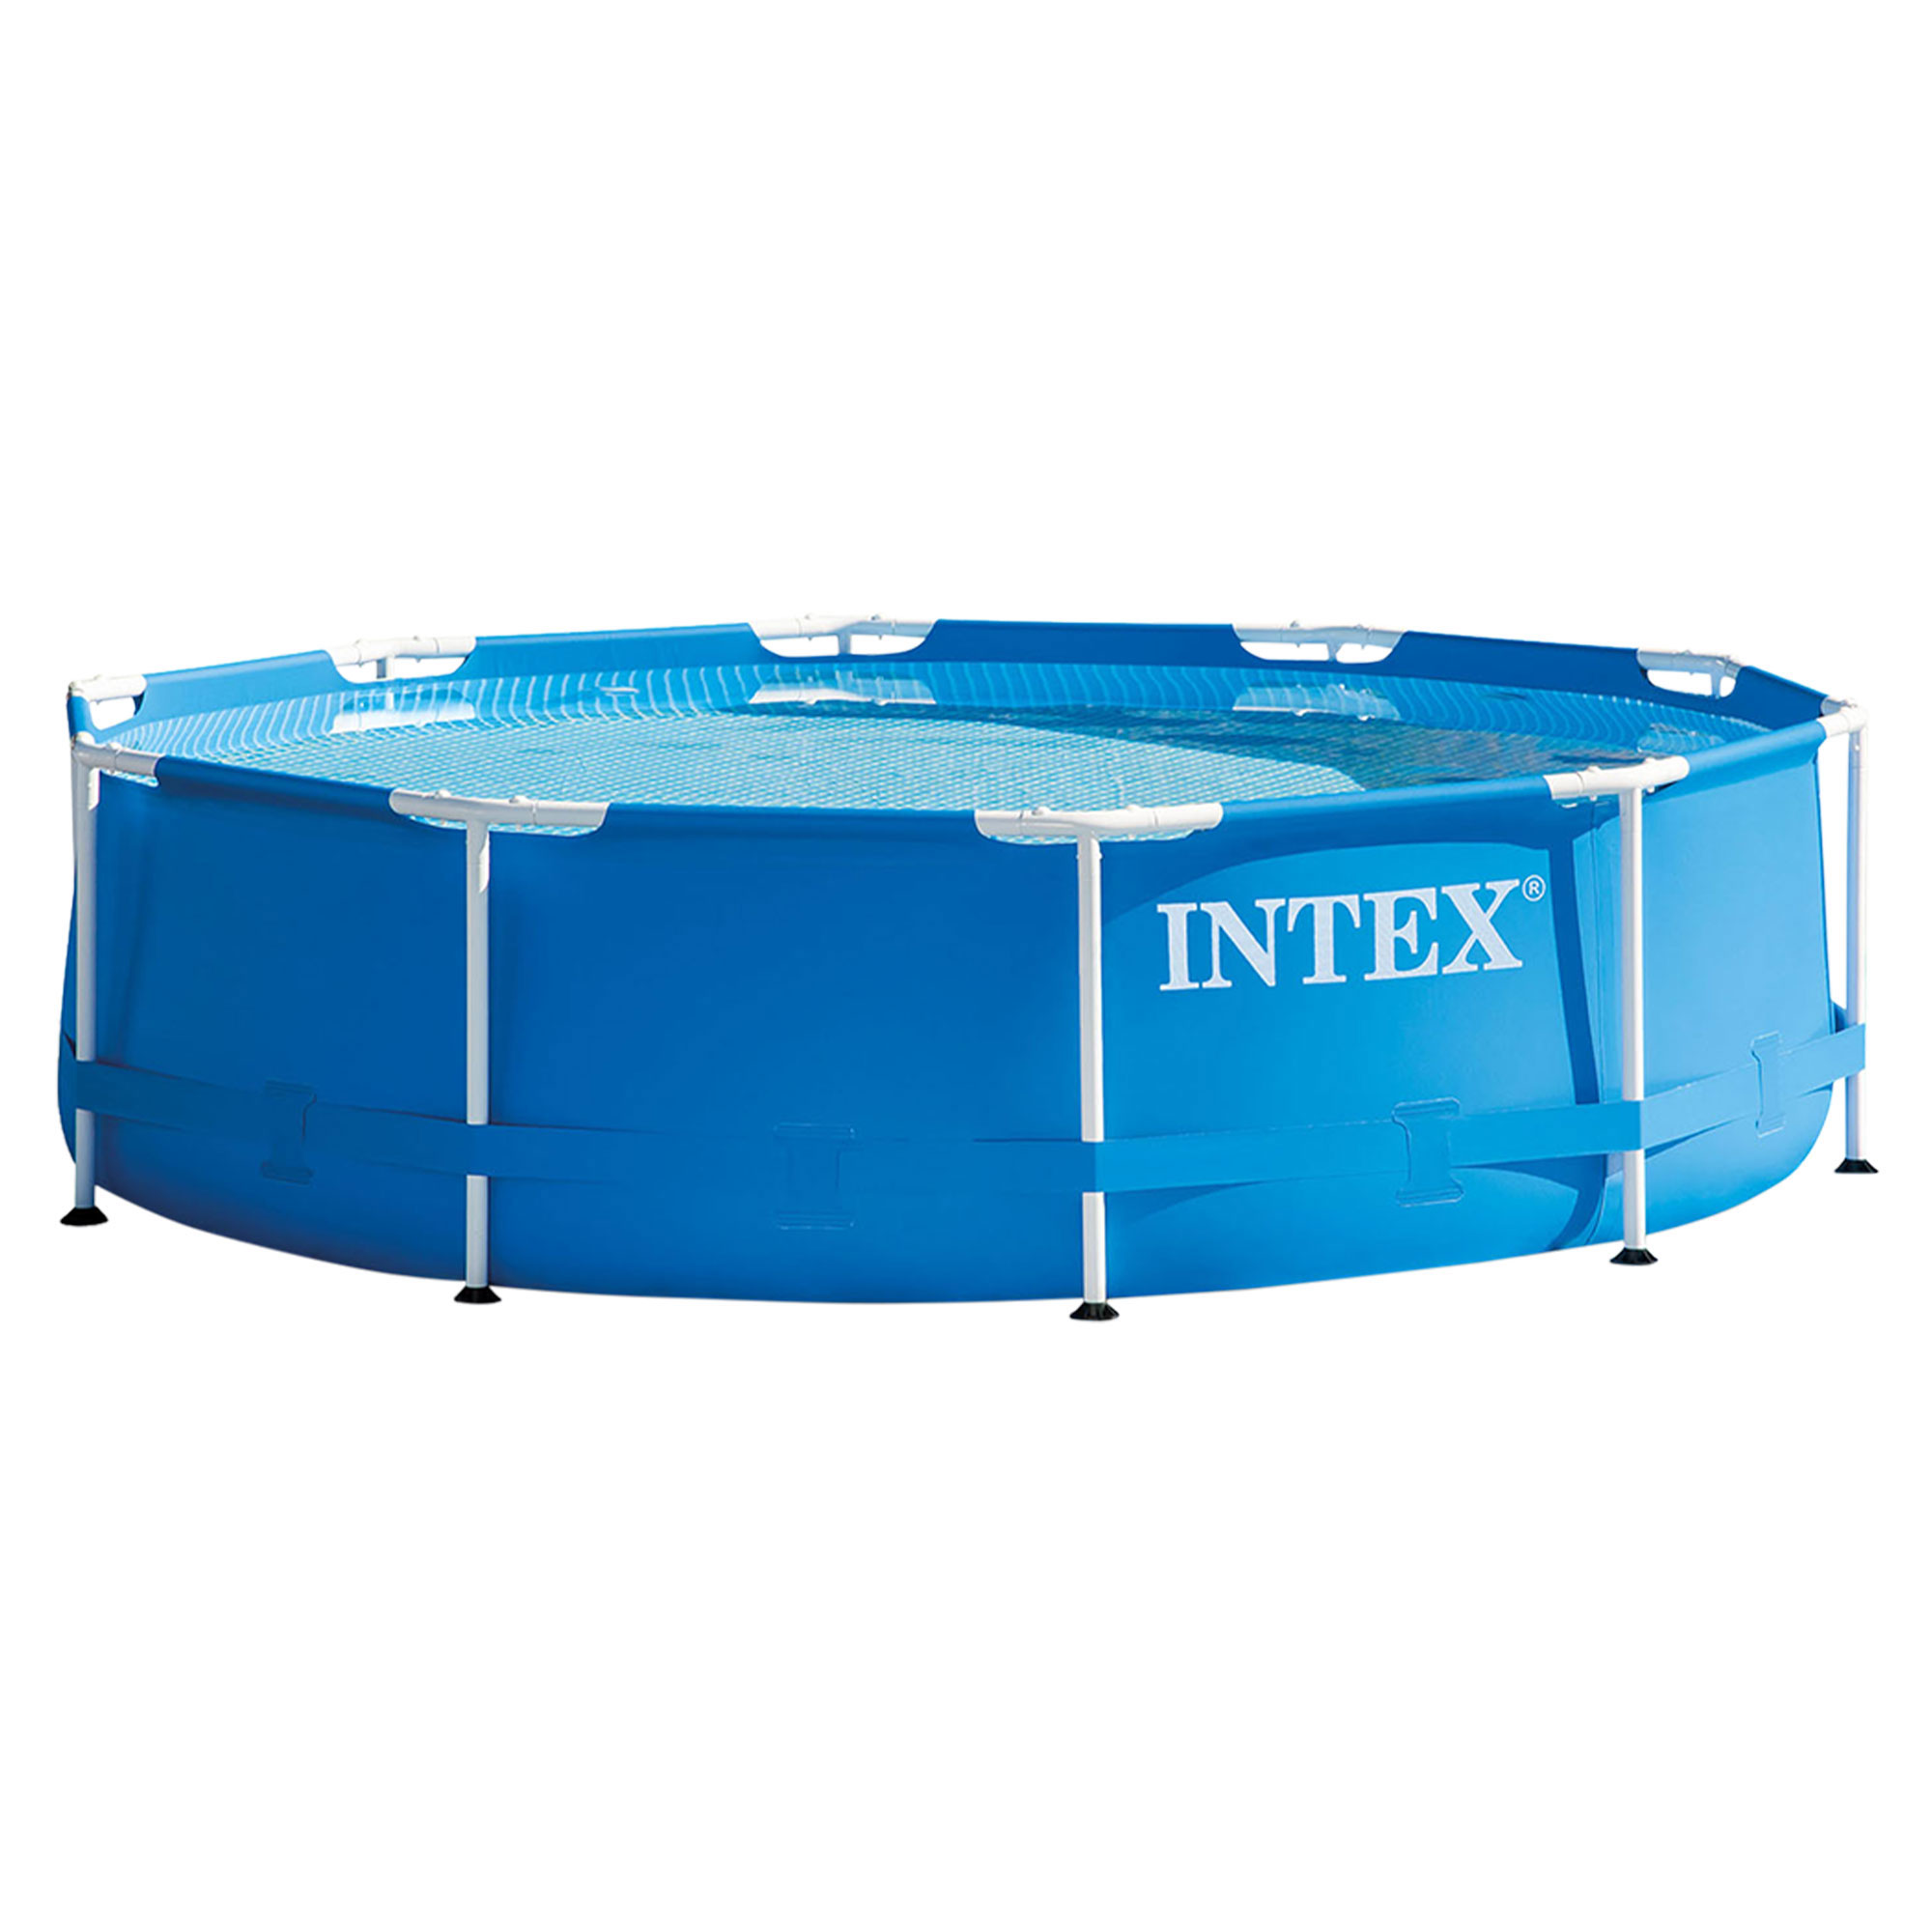 Intex 10 Ft x 30 In Above Ground Round Swimming Pool, (Pump Not Included) - image 1 of 4